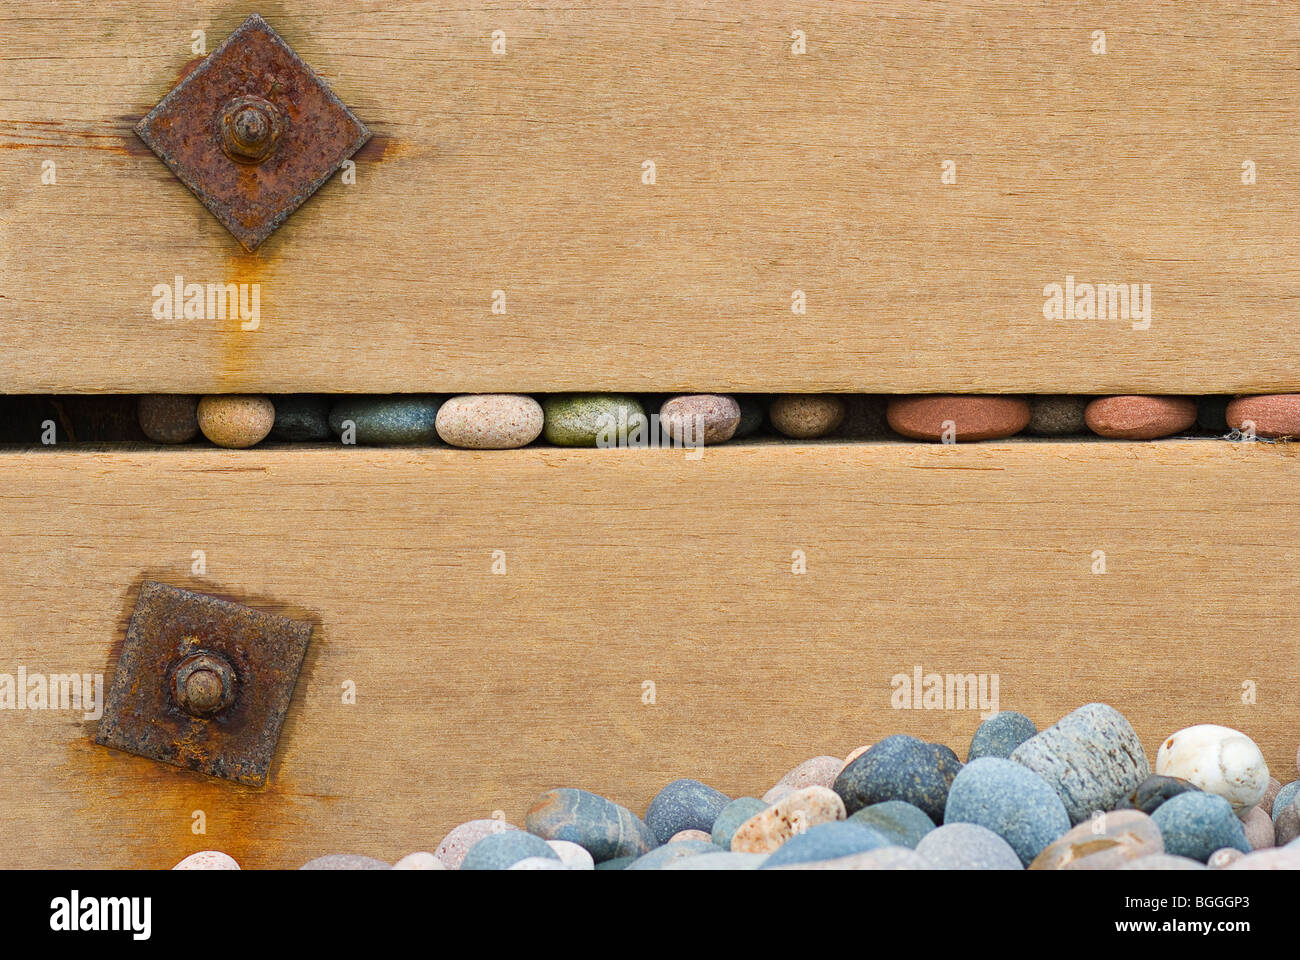 Smooth pebbles trapped in the gaps of wooden groins or sea defences make artistic compositions Stock Photo